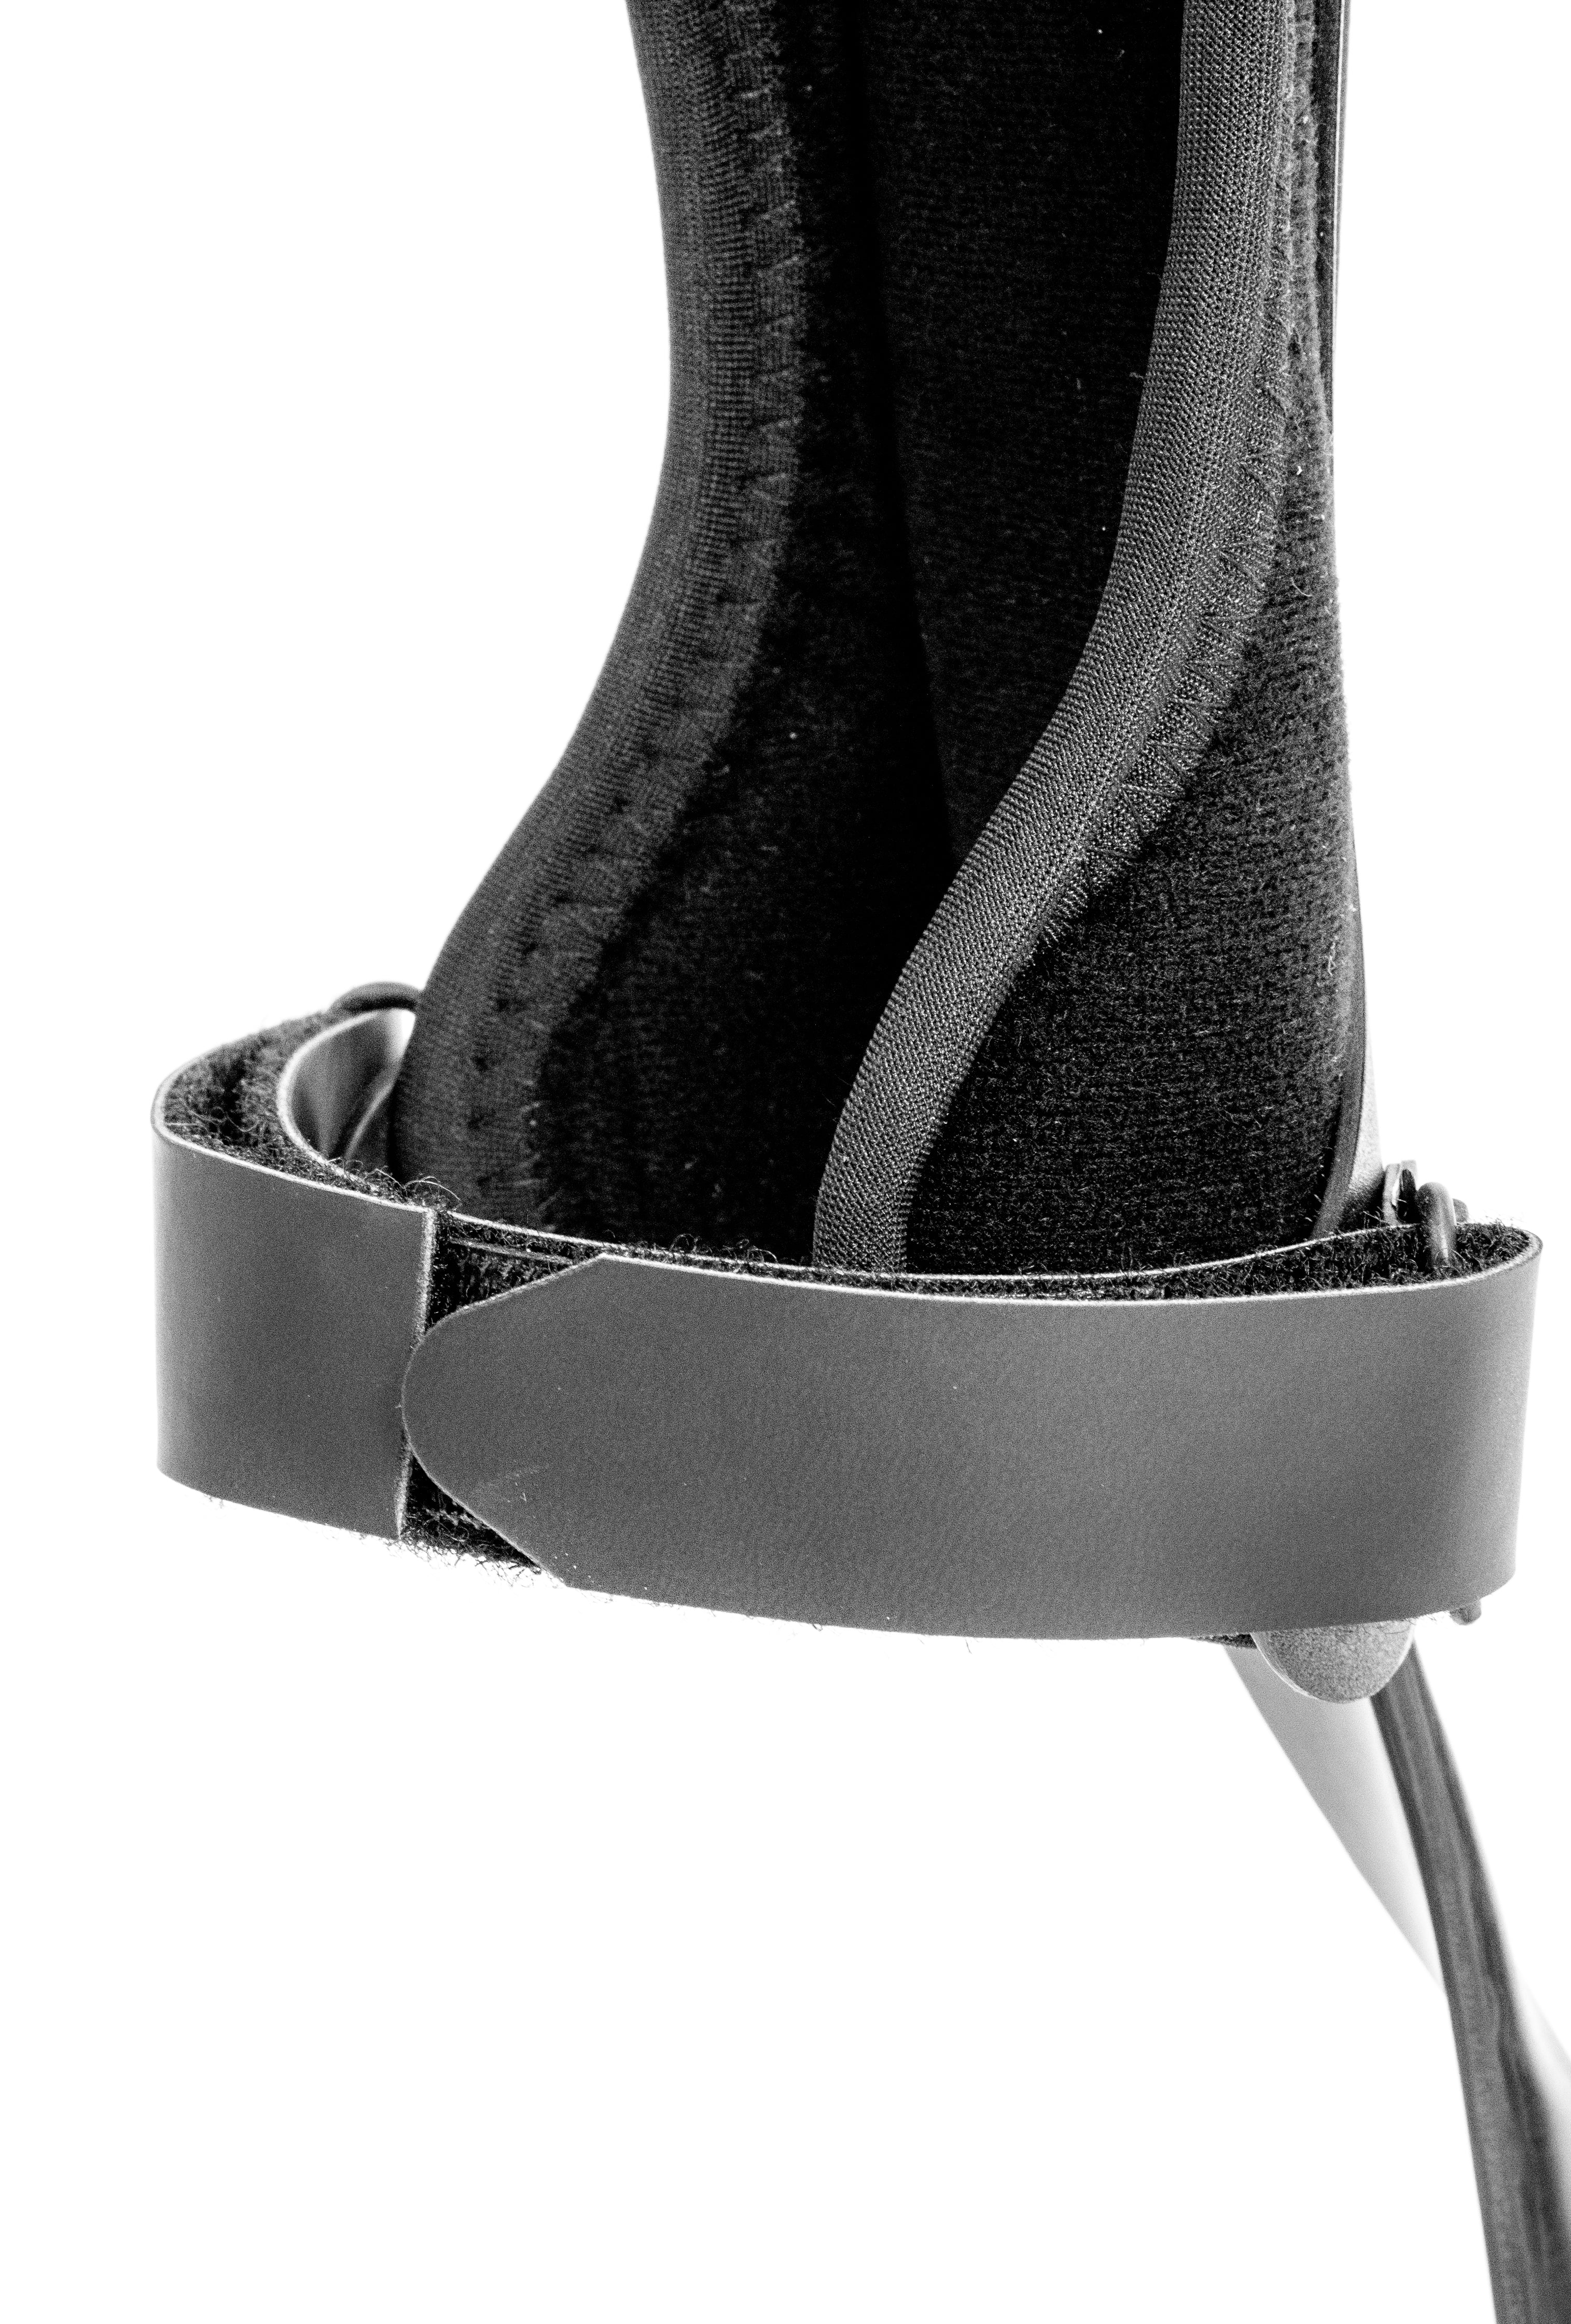 FH250A Matrix/Max Anterior Shell with Straps and Pads